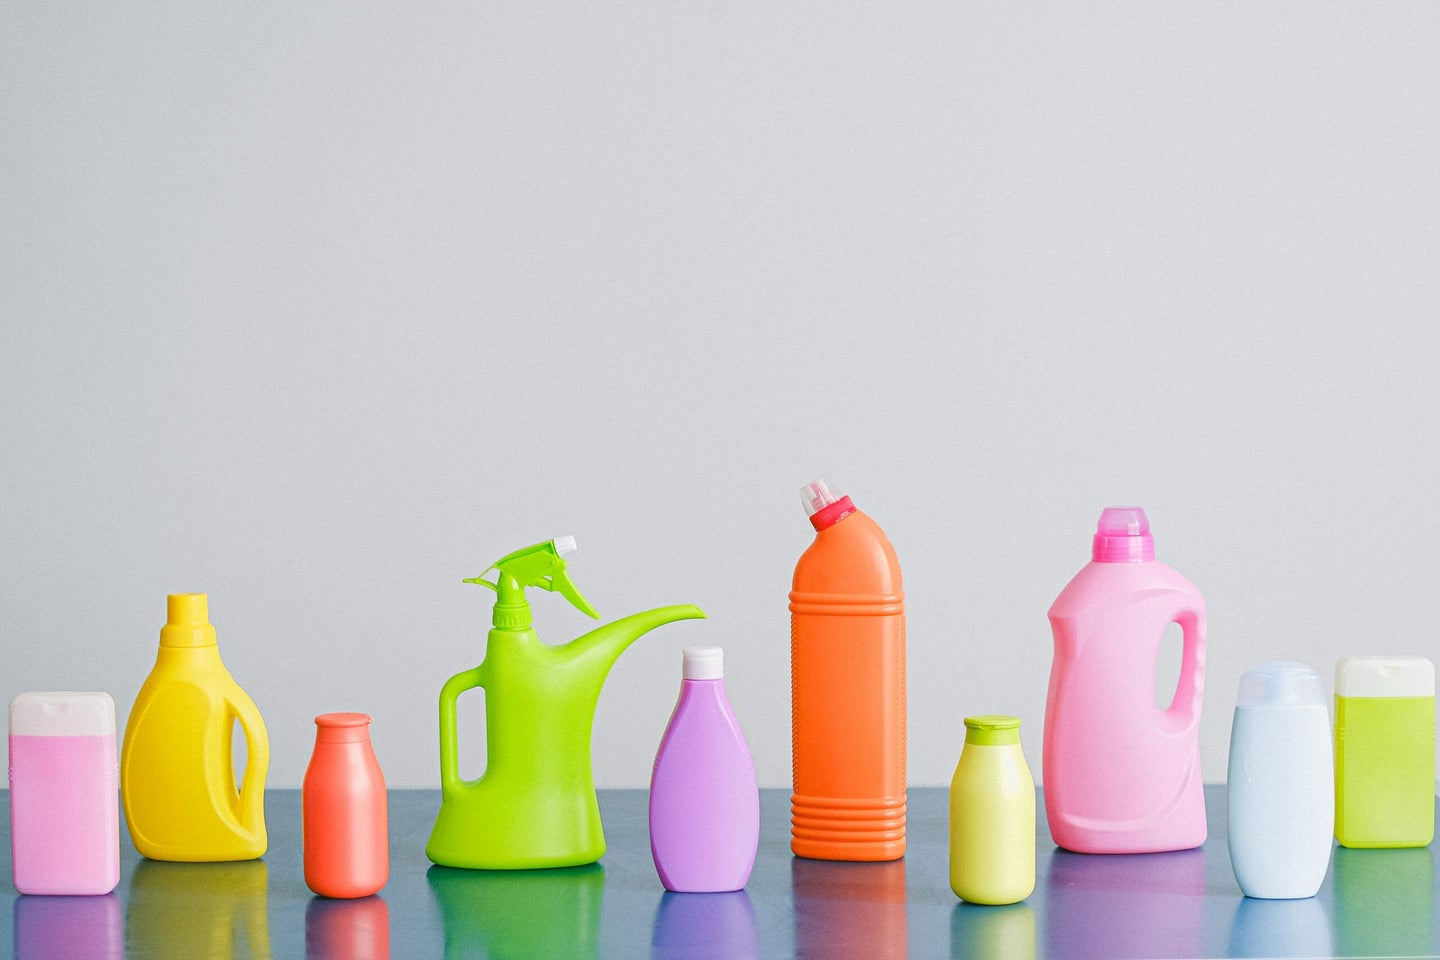 Colorful cleaning products on blank background.